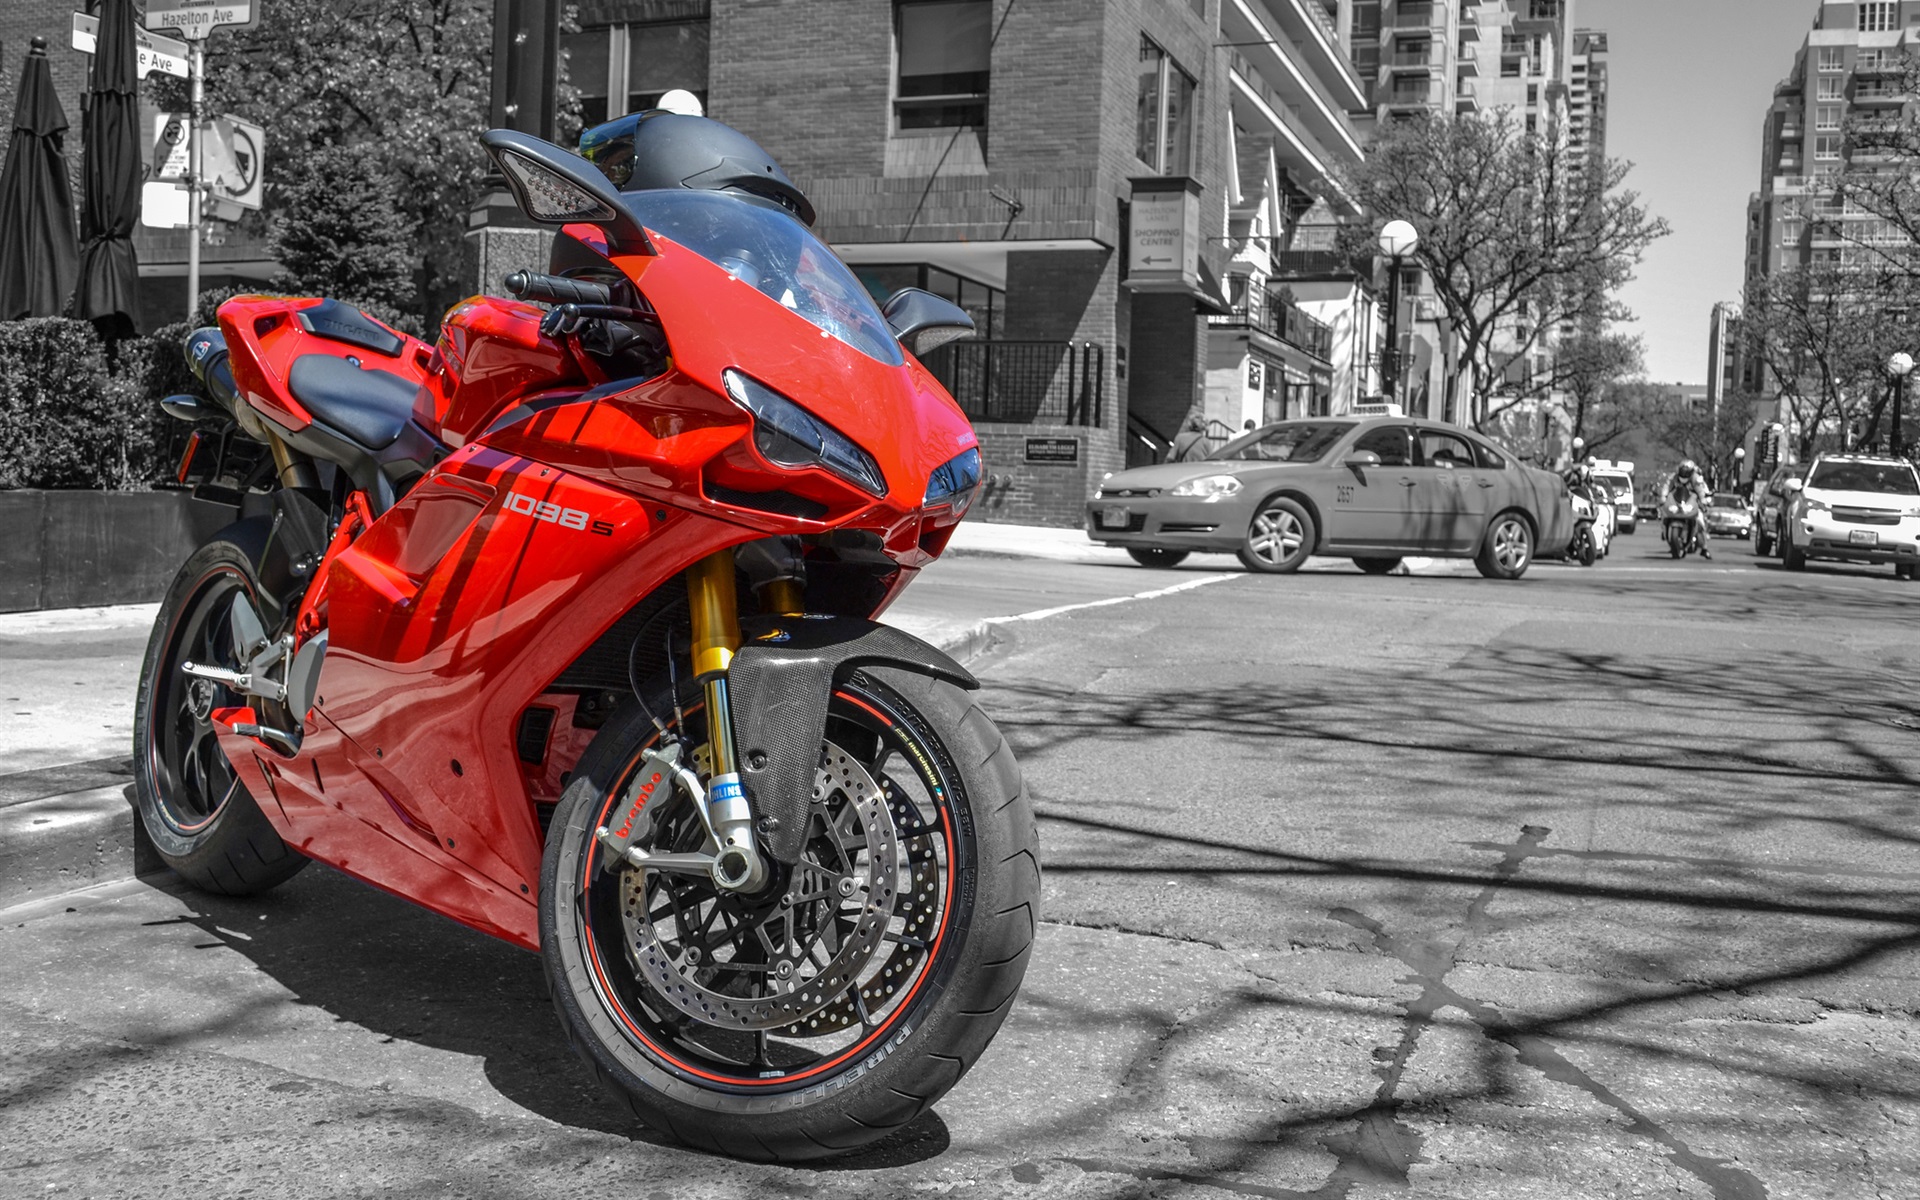 Wallpaper Ducati 1098S red motorcycle at street 1920x1200 HD 1920x1200